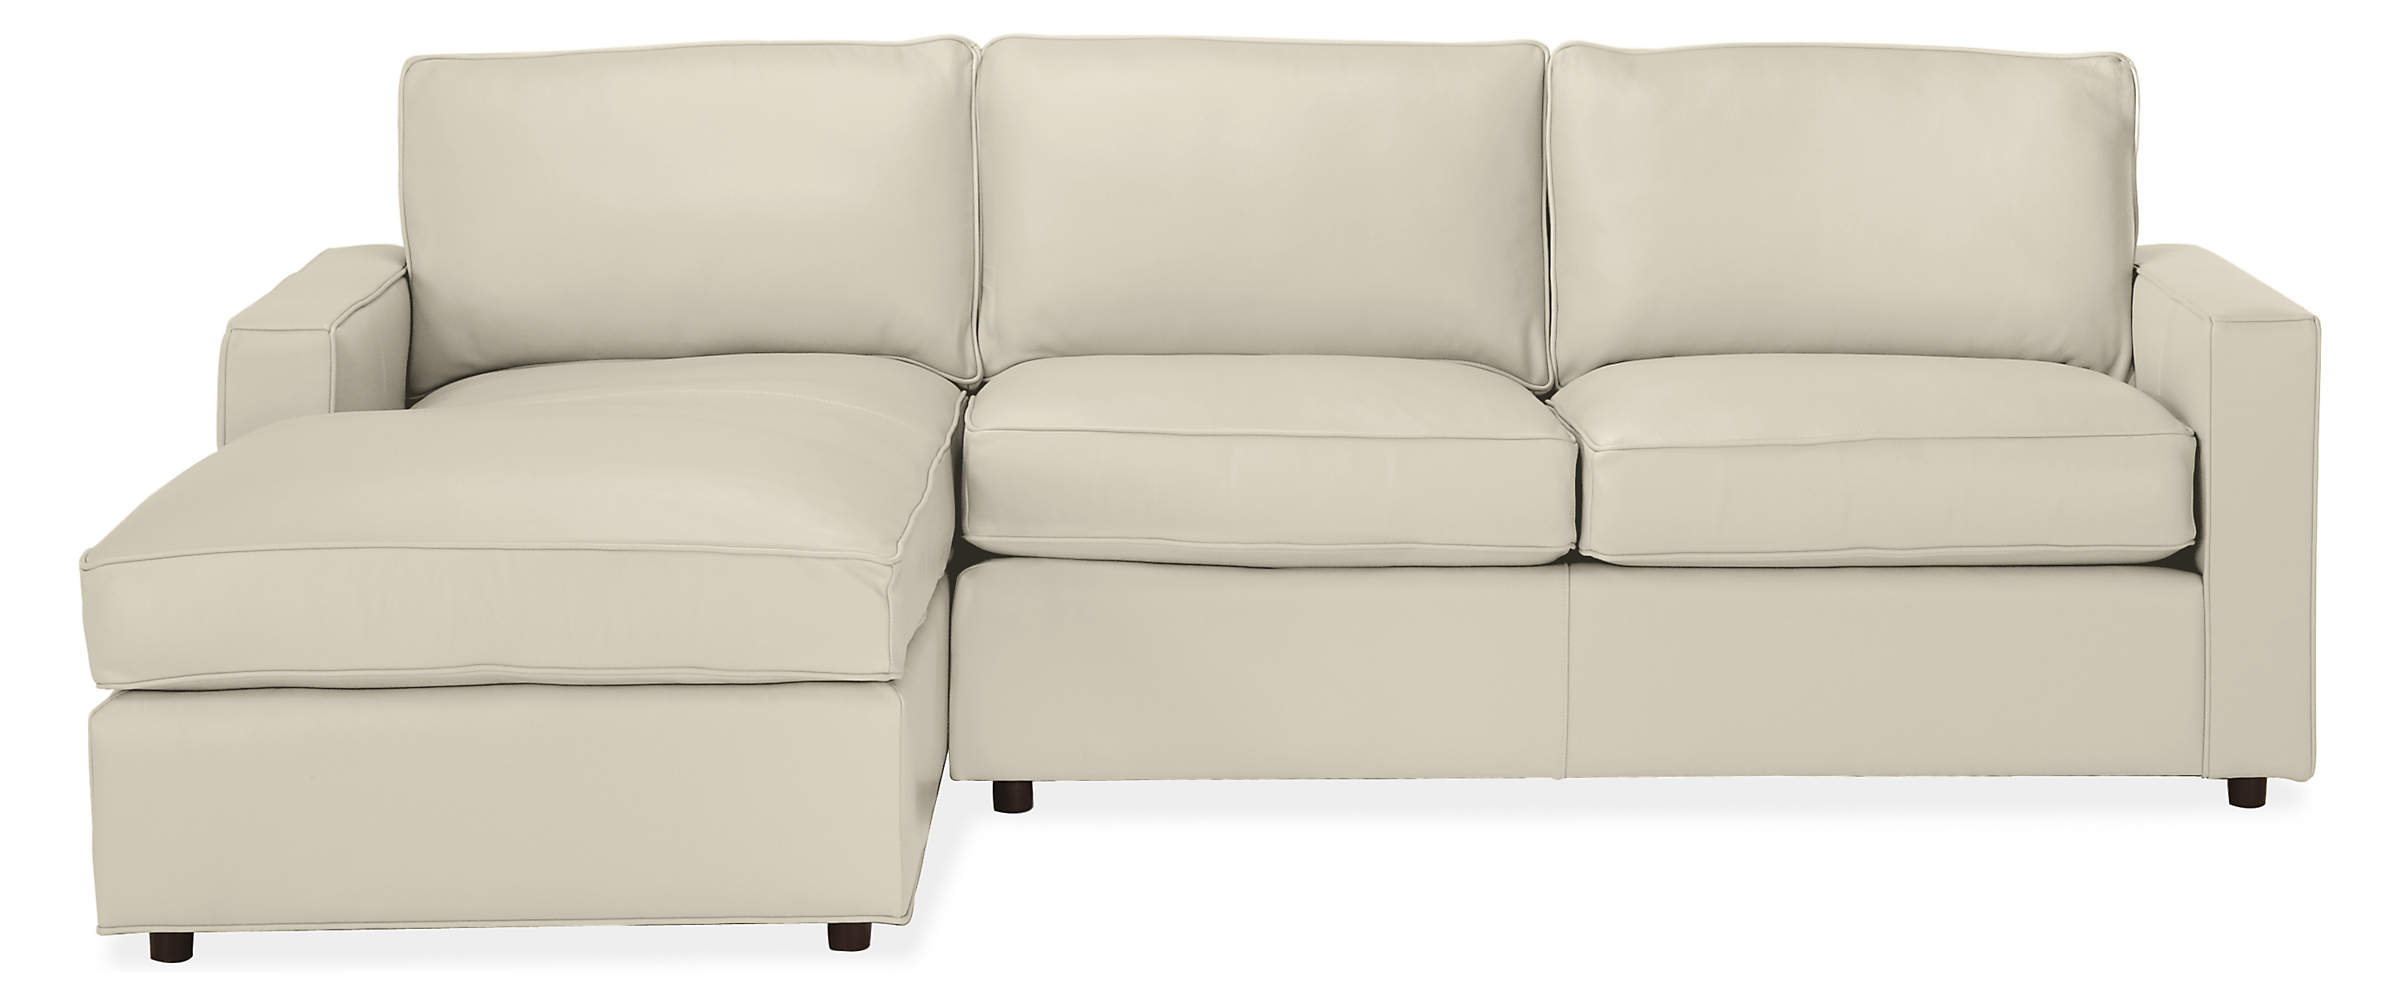 York Leather Sofas with Chaise